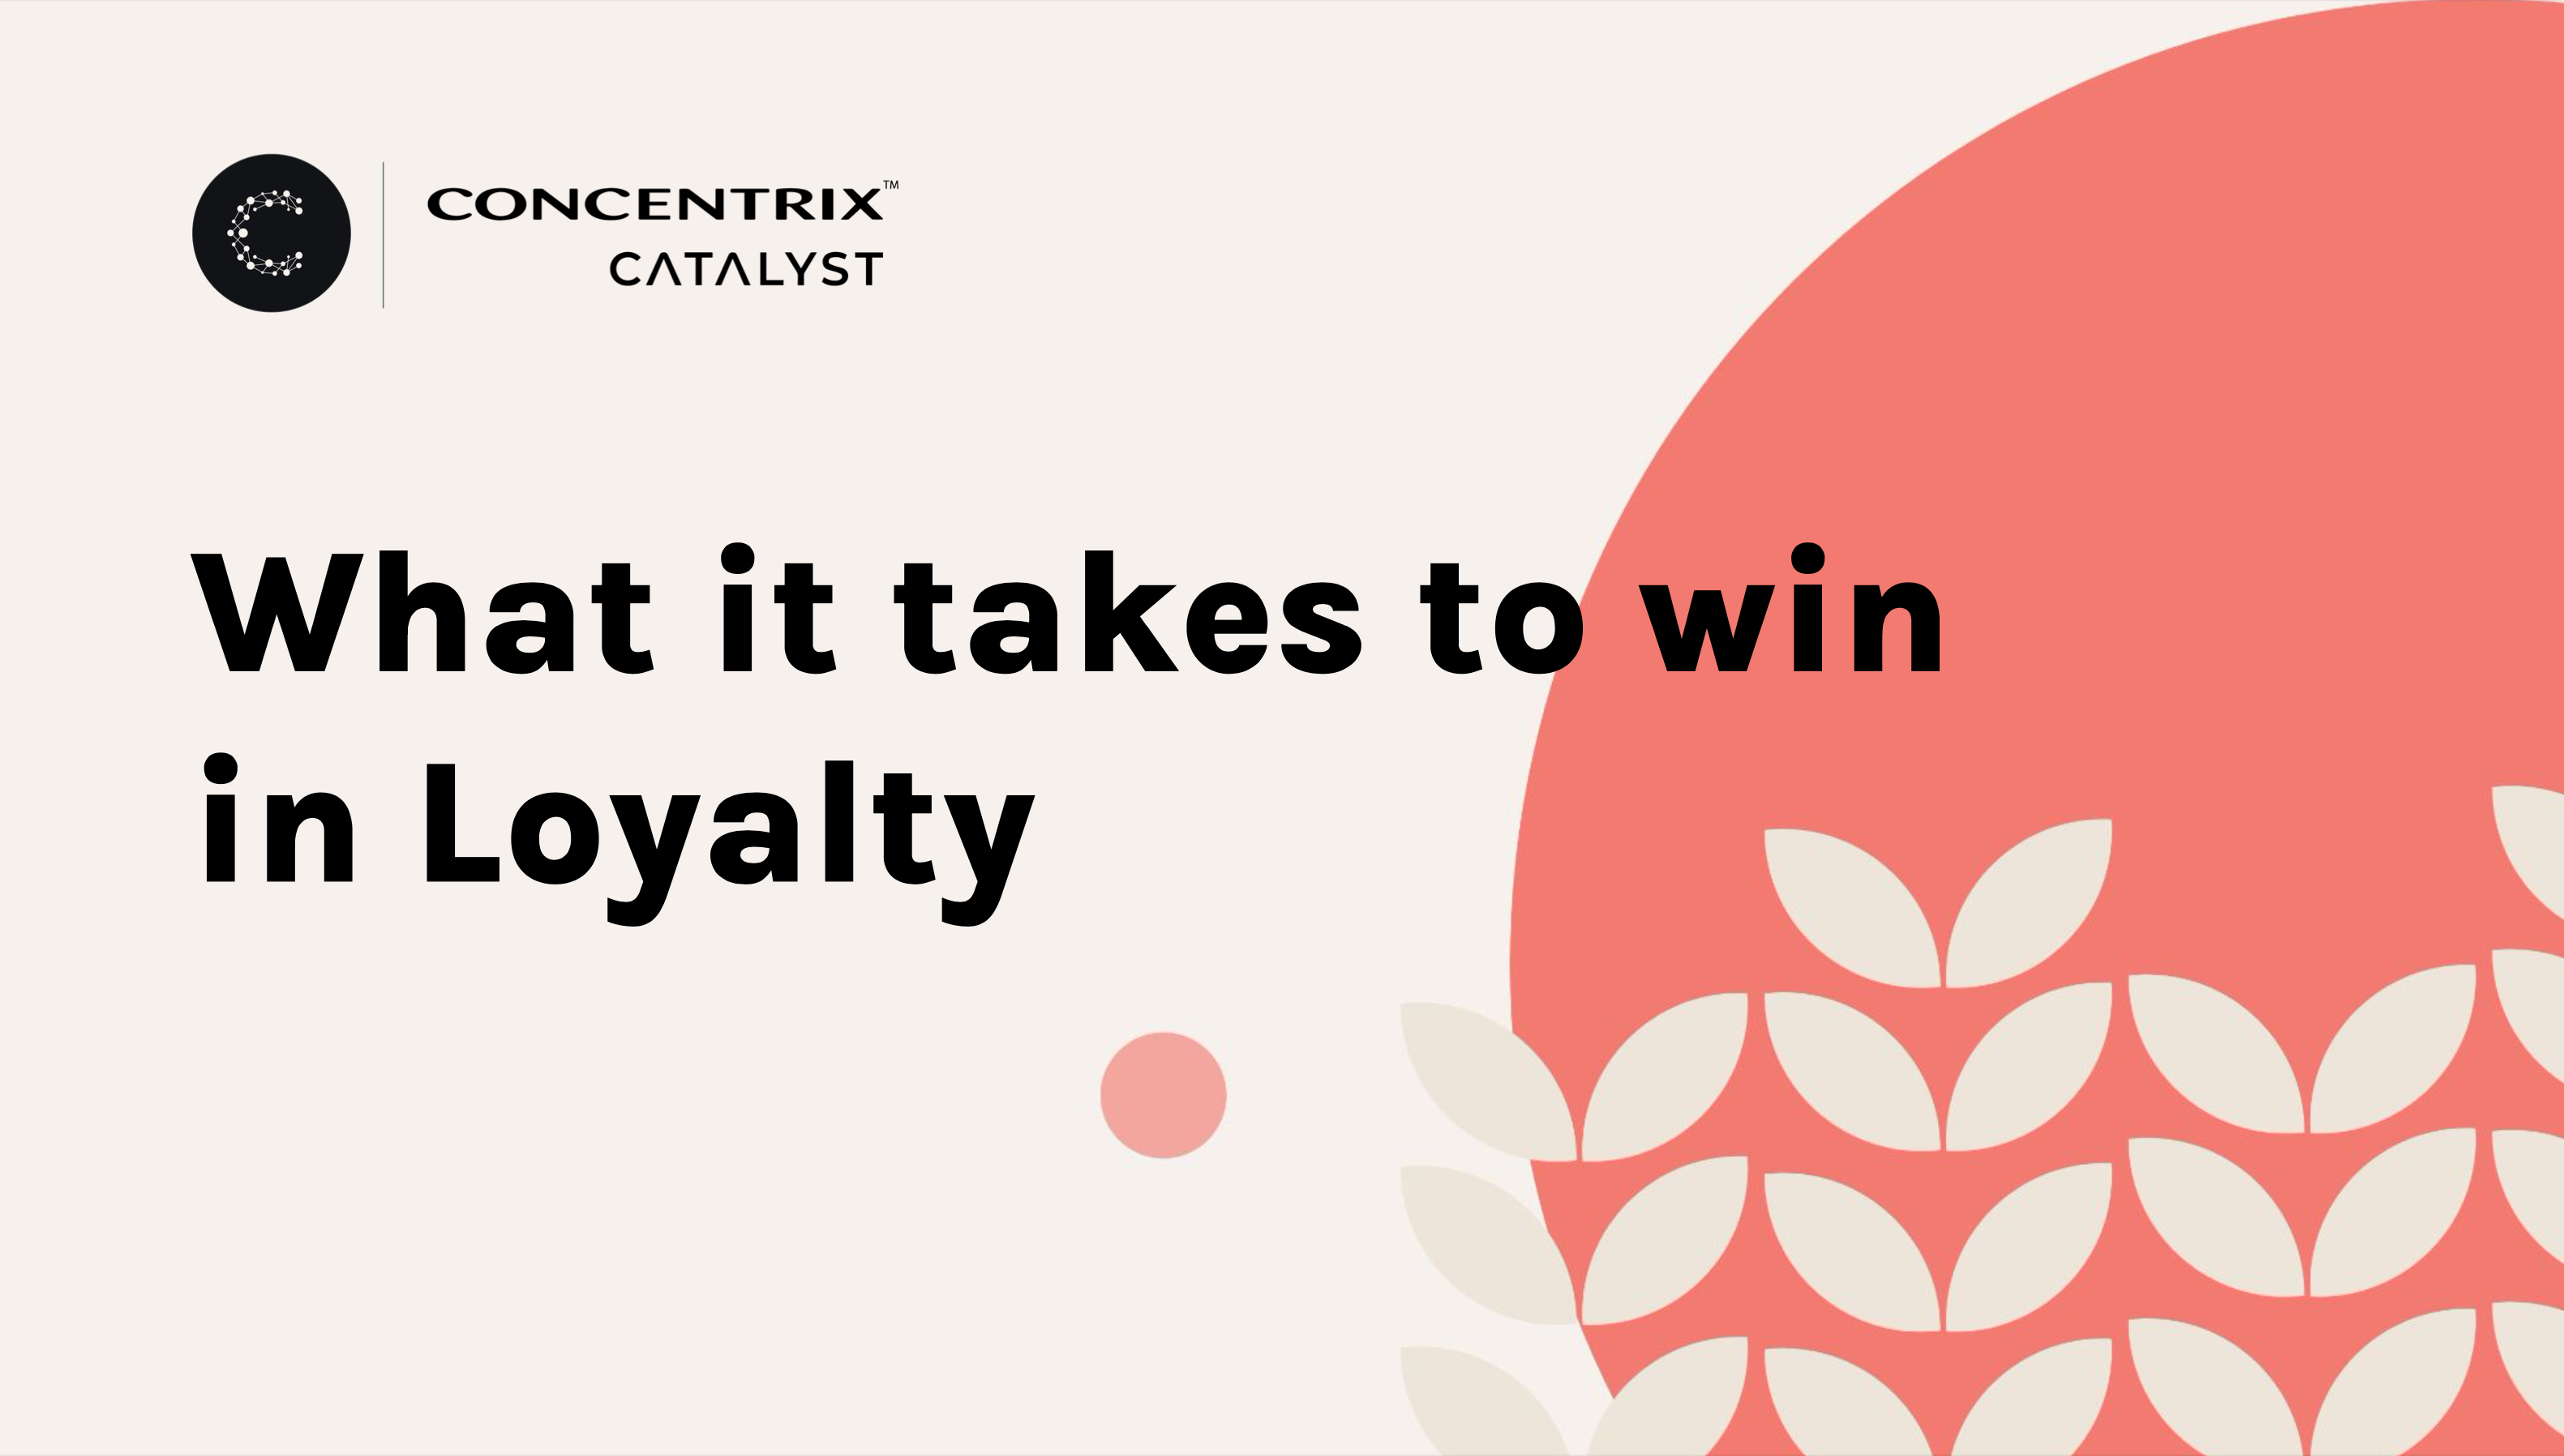 What It Takes to Win with Loyalty